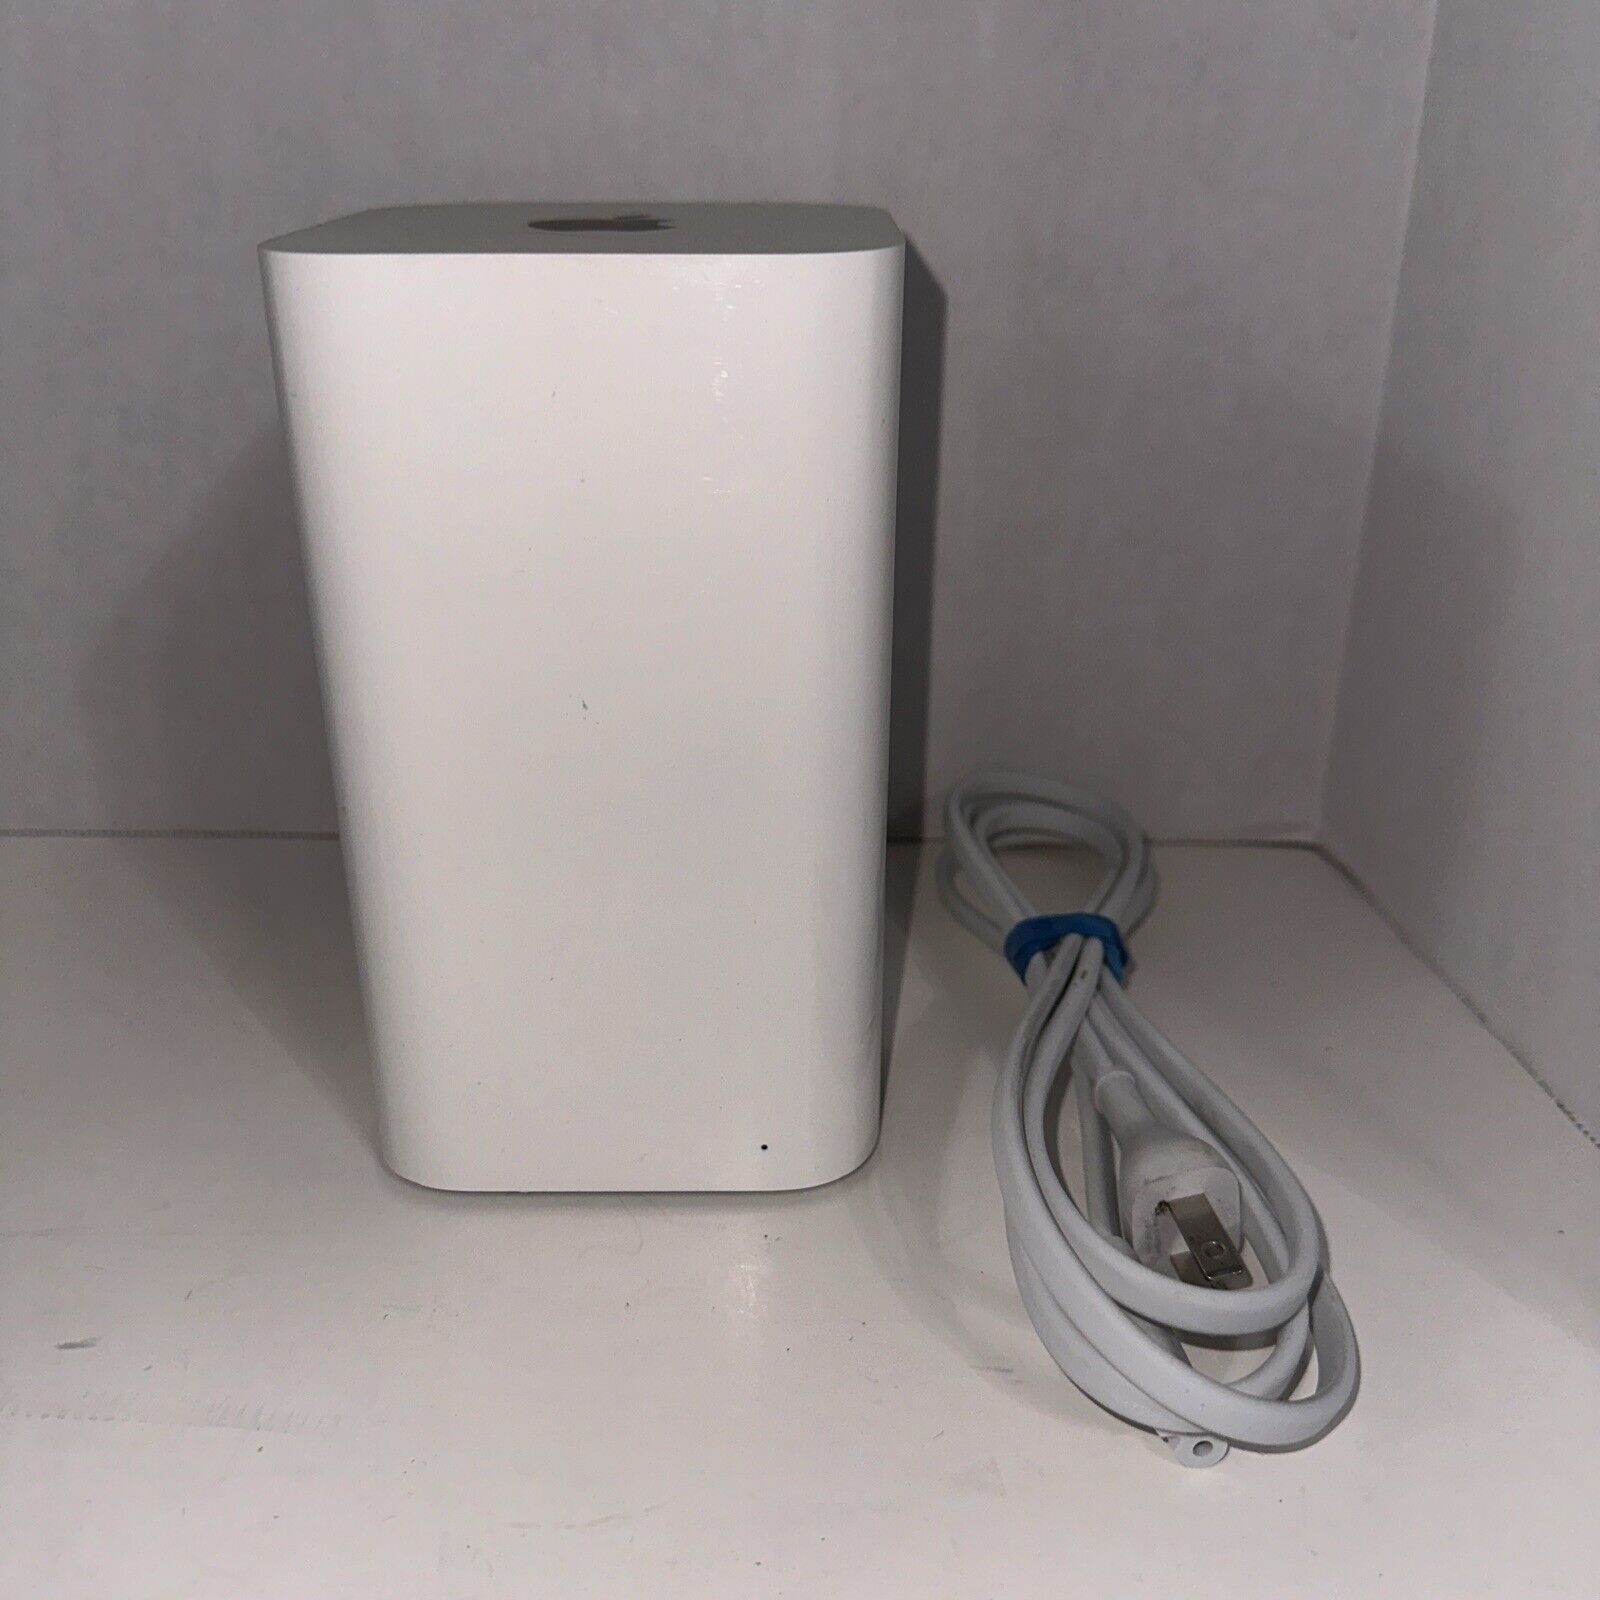 Apple A1470 Airport Extreme 2TB Time Capsule ME177LL/A 802.11ac